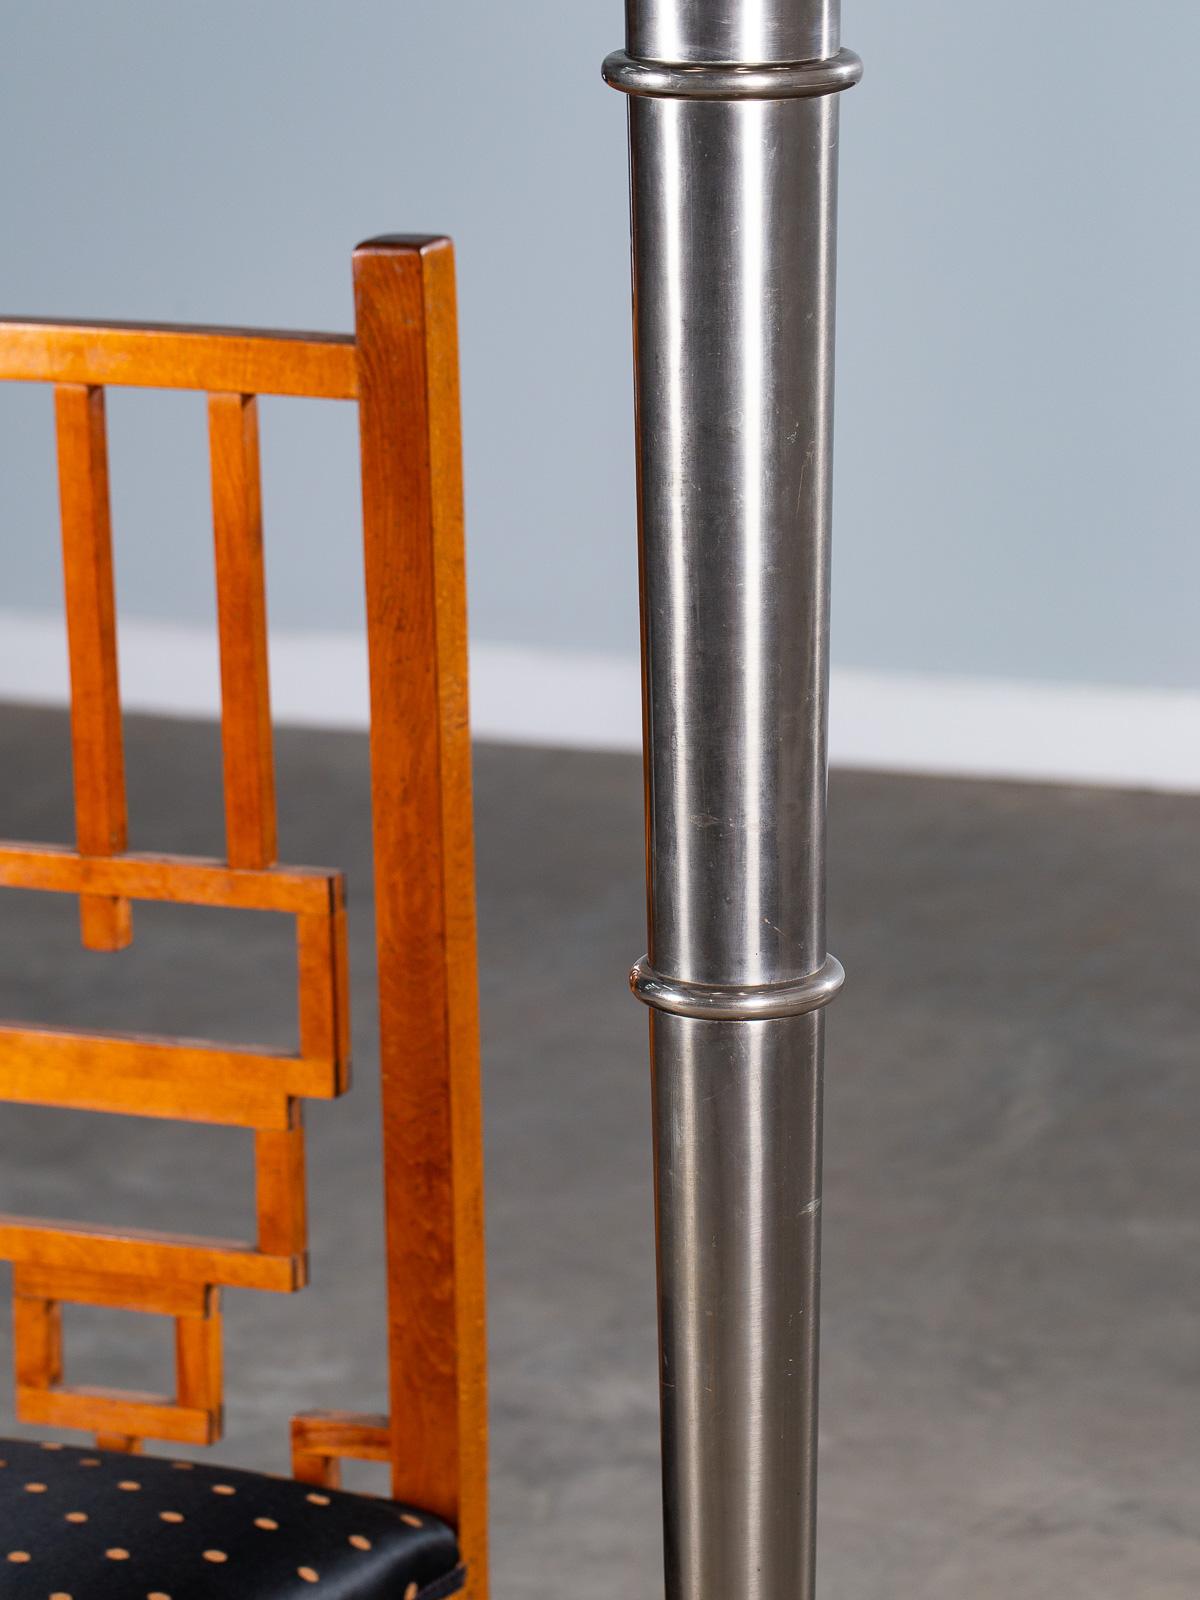 Massive Art Deco Jean Perzel Style Torchiere Floor Lamp, circa 1935 In Good Condition For Sale In Houston, TX